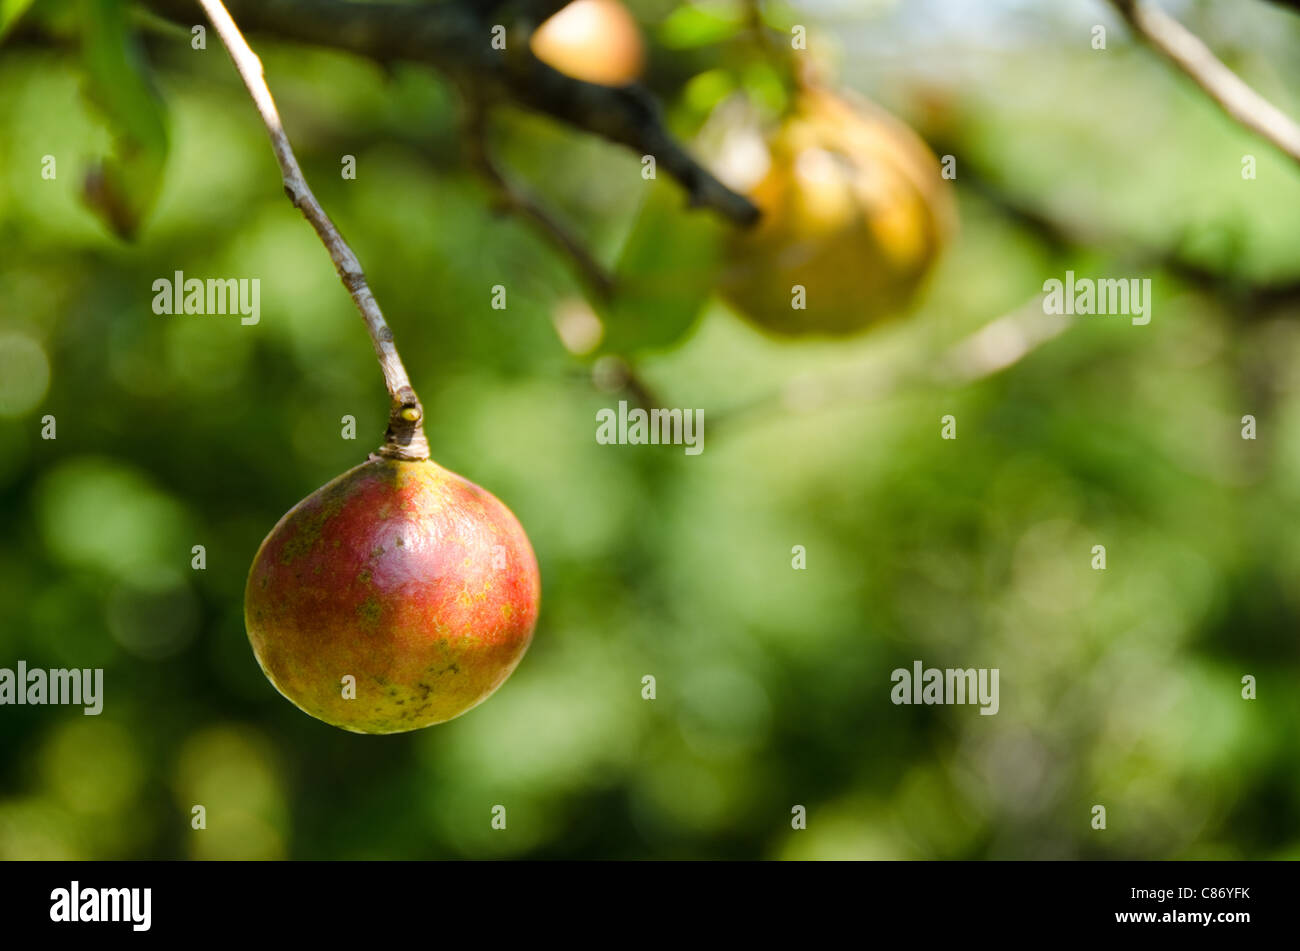 Ripe fruit on the tree of a Japanese Camellia, Camellia japonica Stock Photo